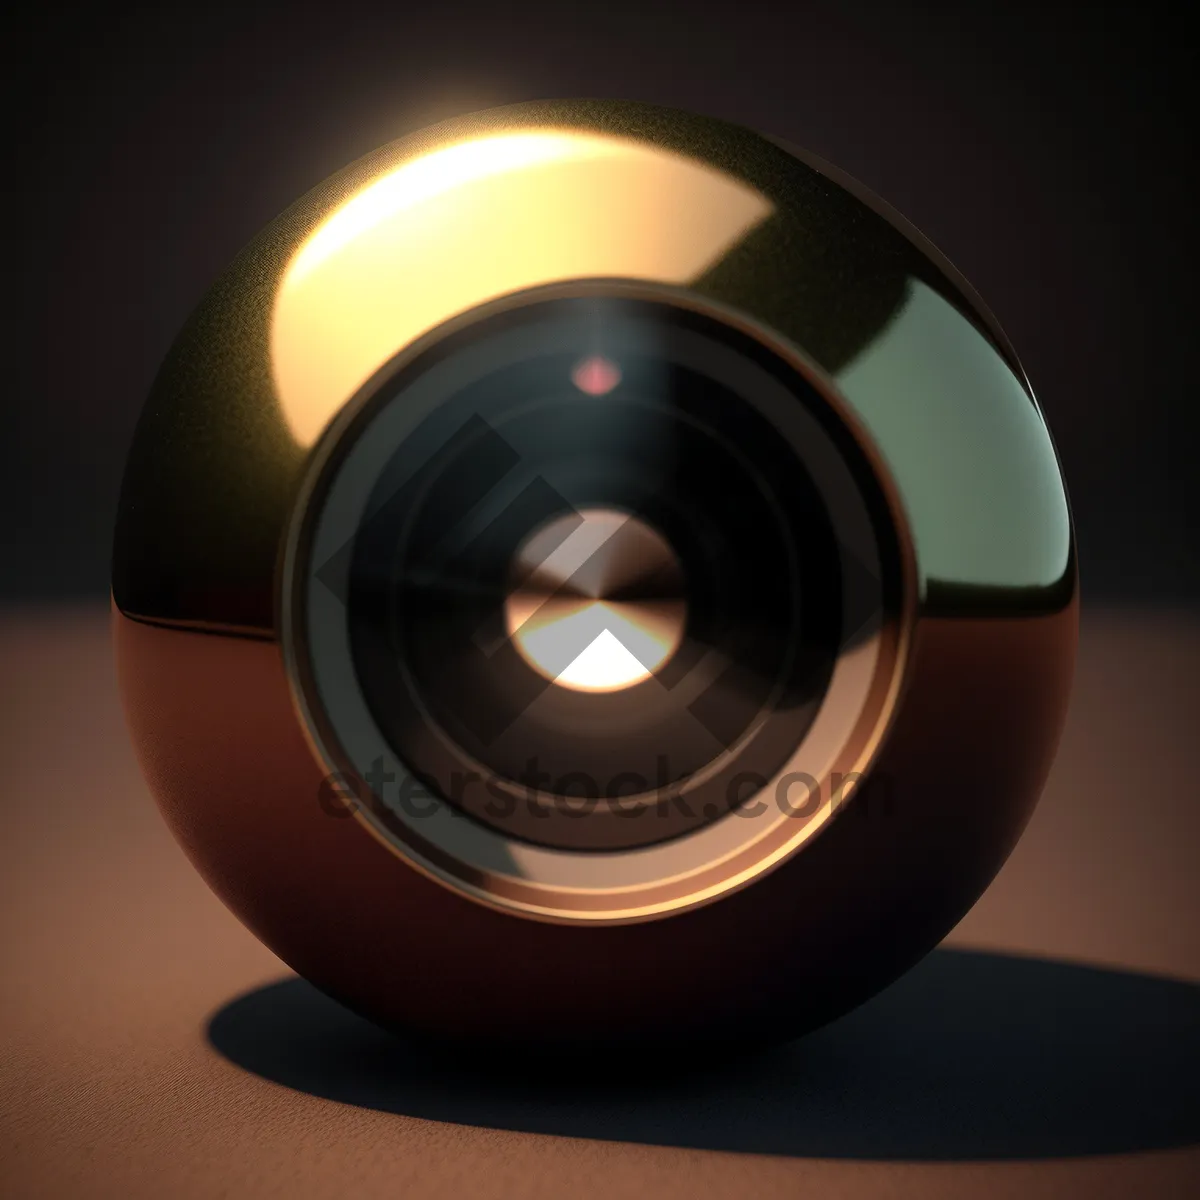 Picture of Colorful Aperture Control with Shiny Reflection